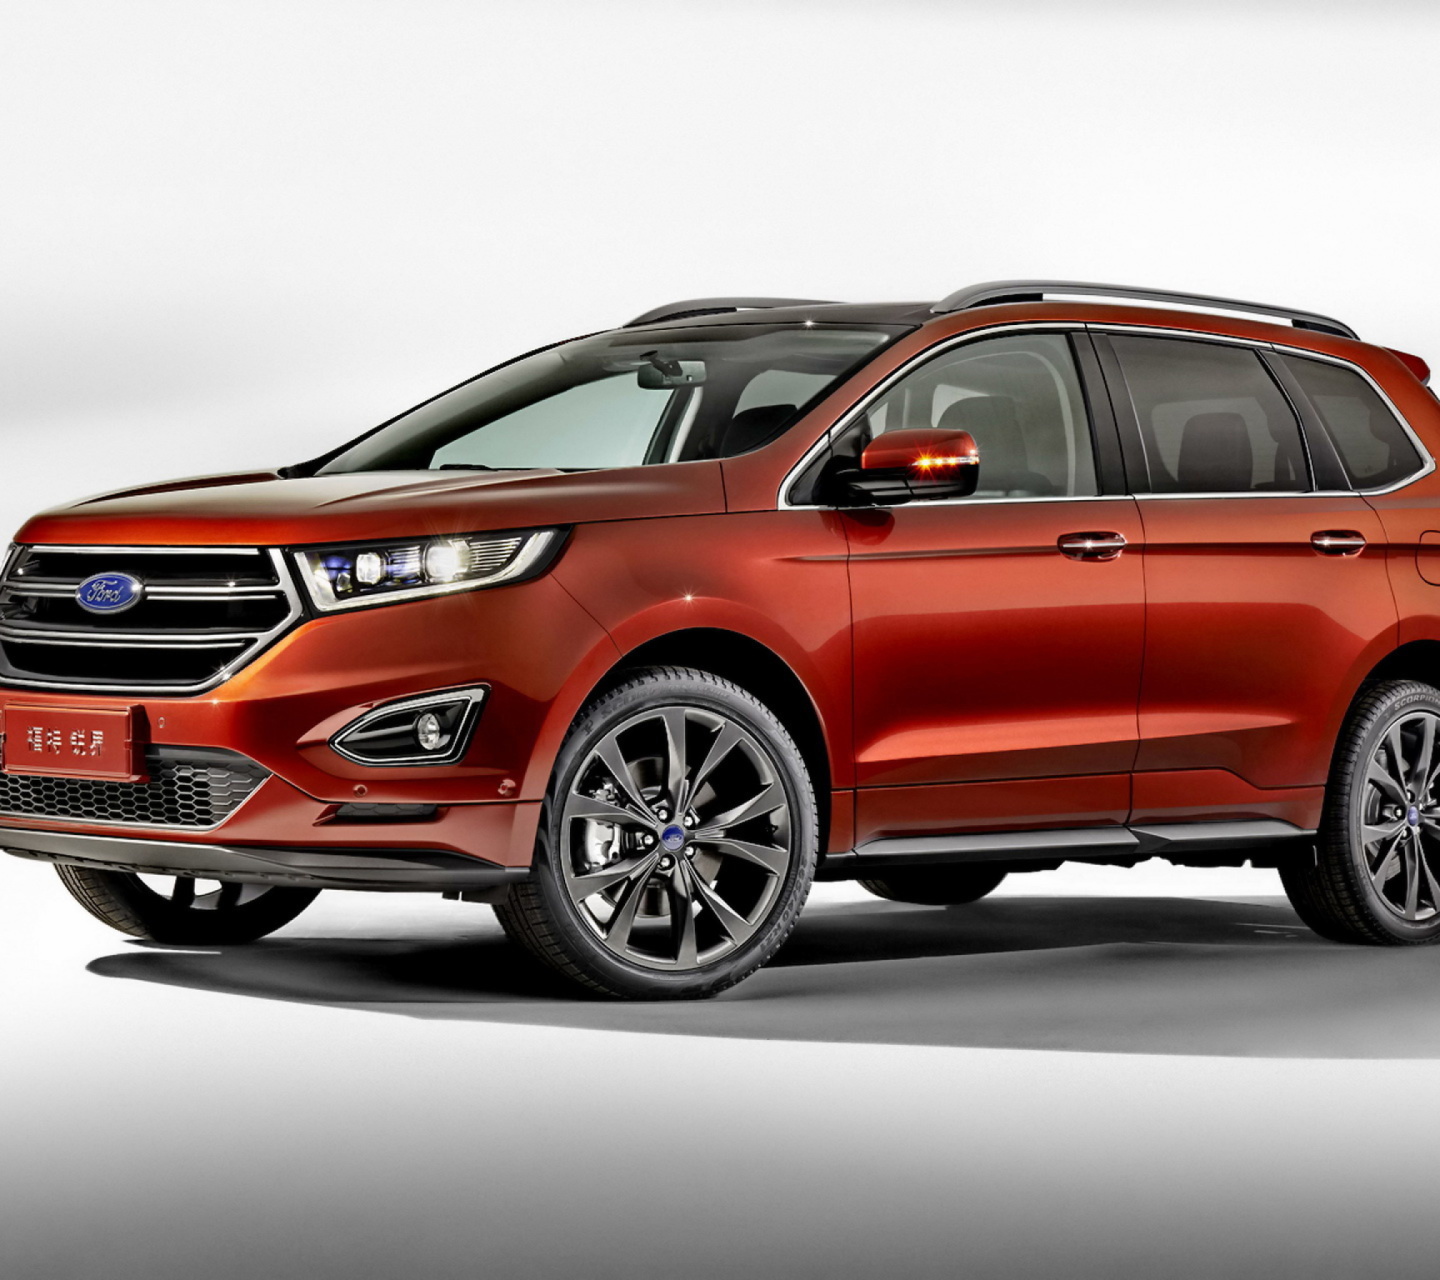 2014 Ford Edge Crossover wallpaper 1440x1280